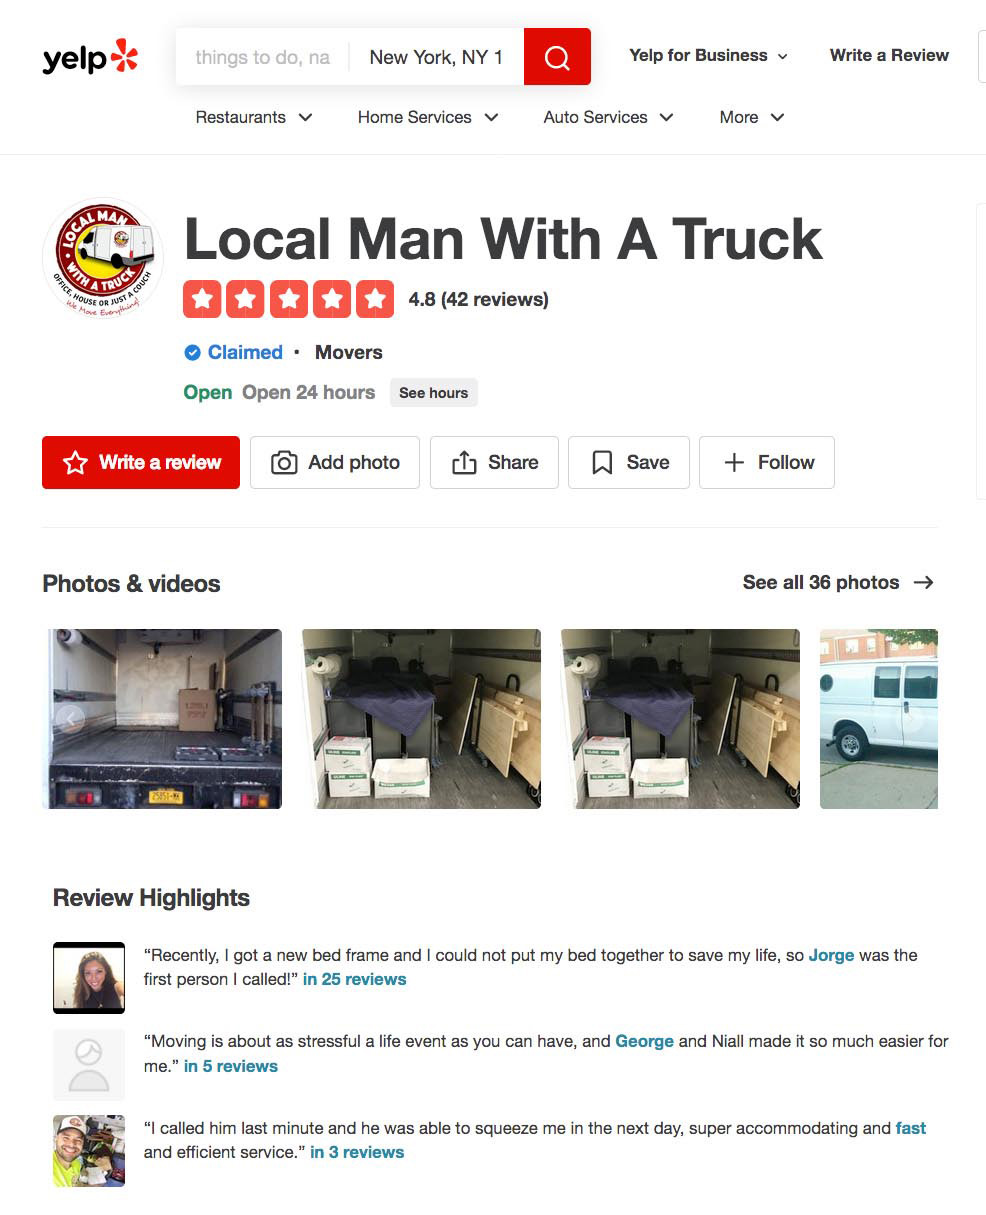 Local Man With A Truck